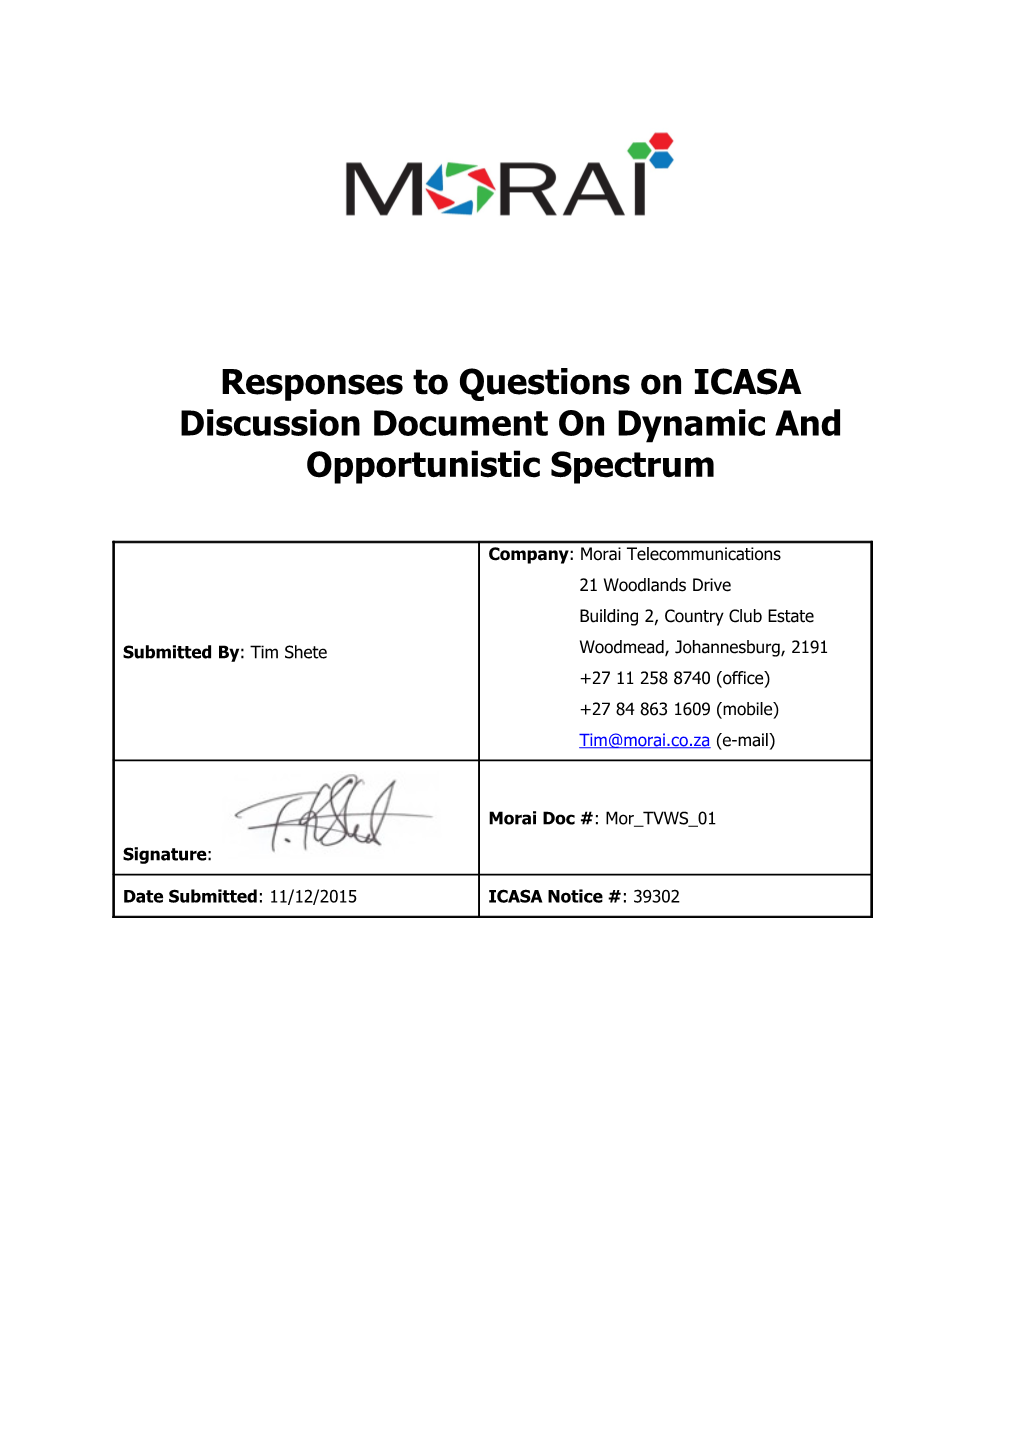 Responses to Questions on ICASA Discussion Document on Dynamic and Opportunistic Spectrum